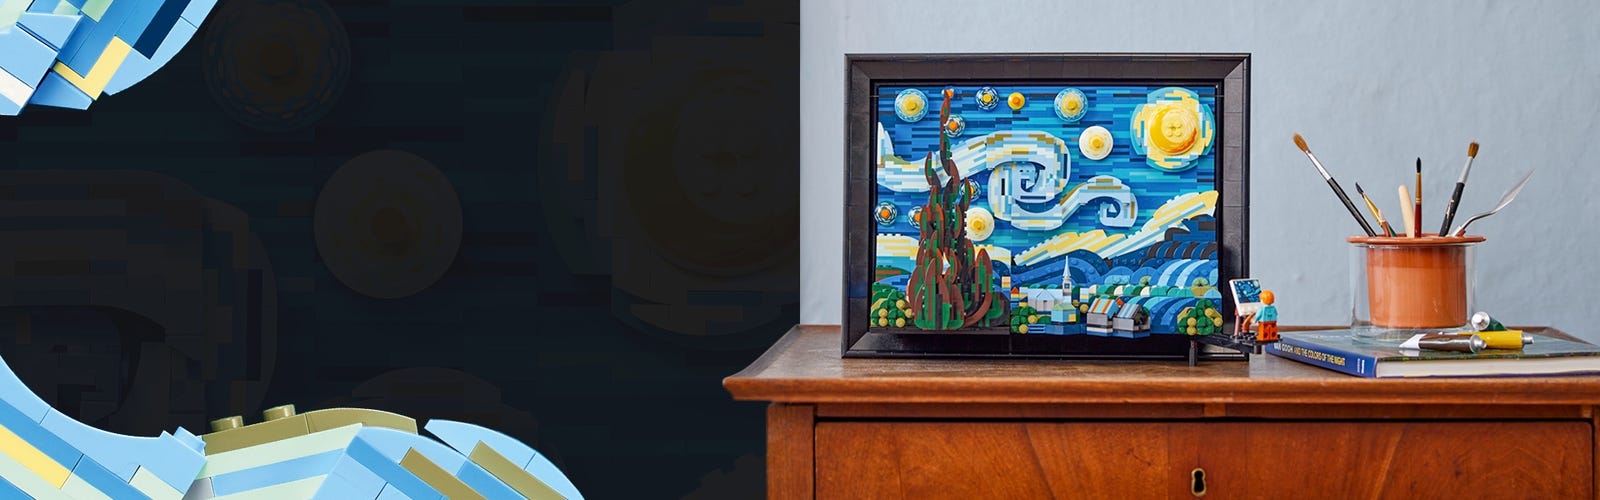 IN STOCK — LEGO 21333 IDEAS #041 VINCENT VAN GOGH THE STARRY NIGHT (2022) —  MISB